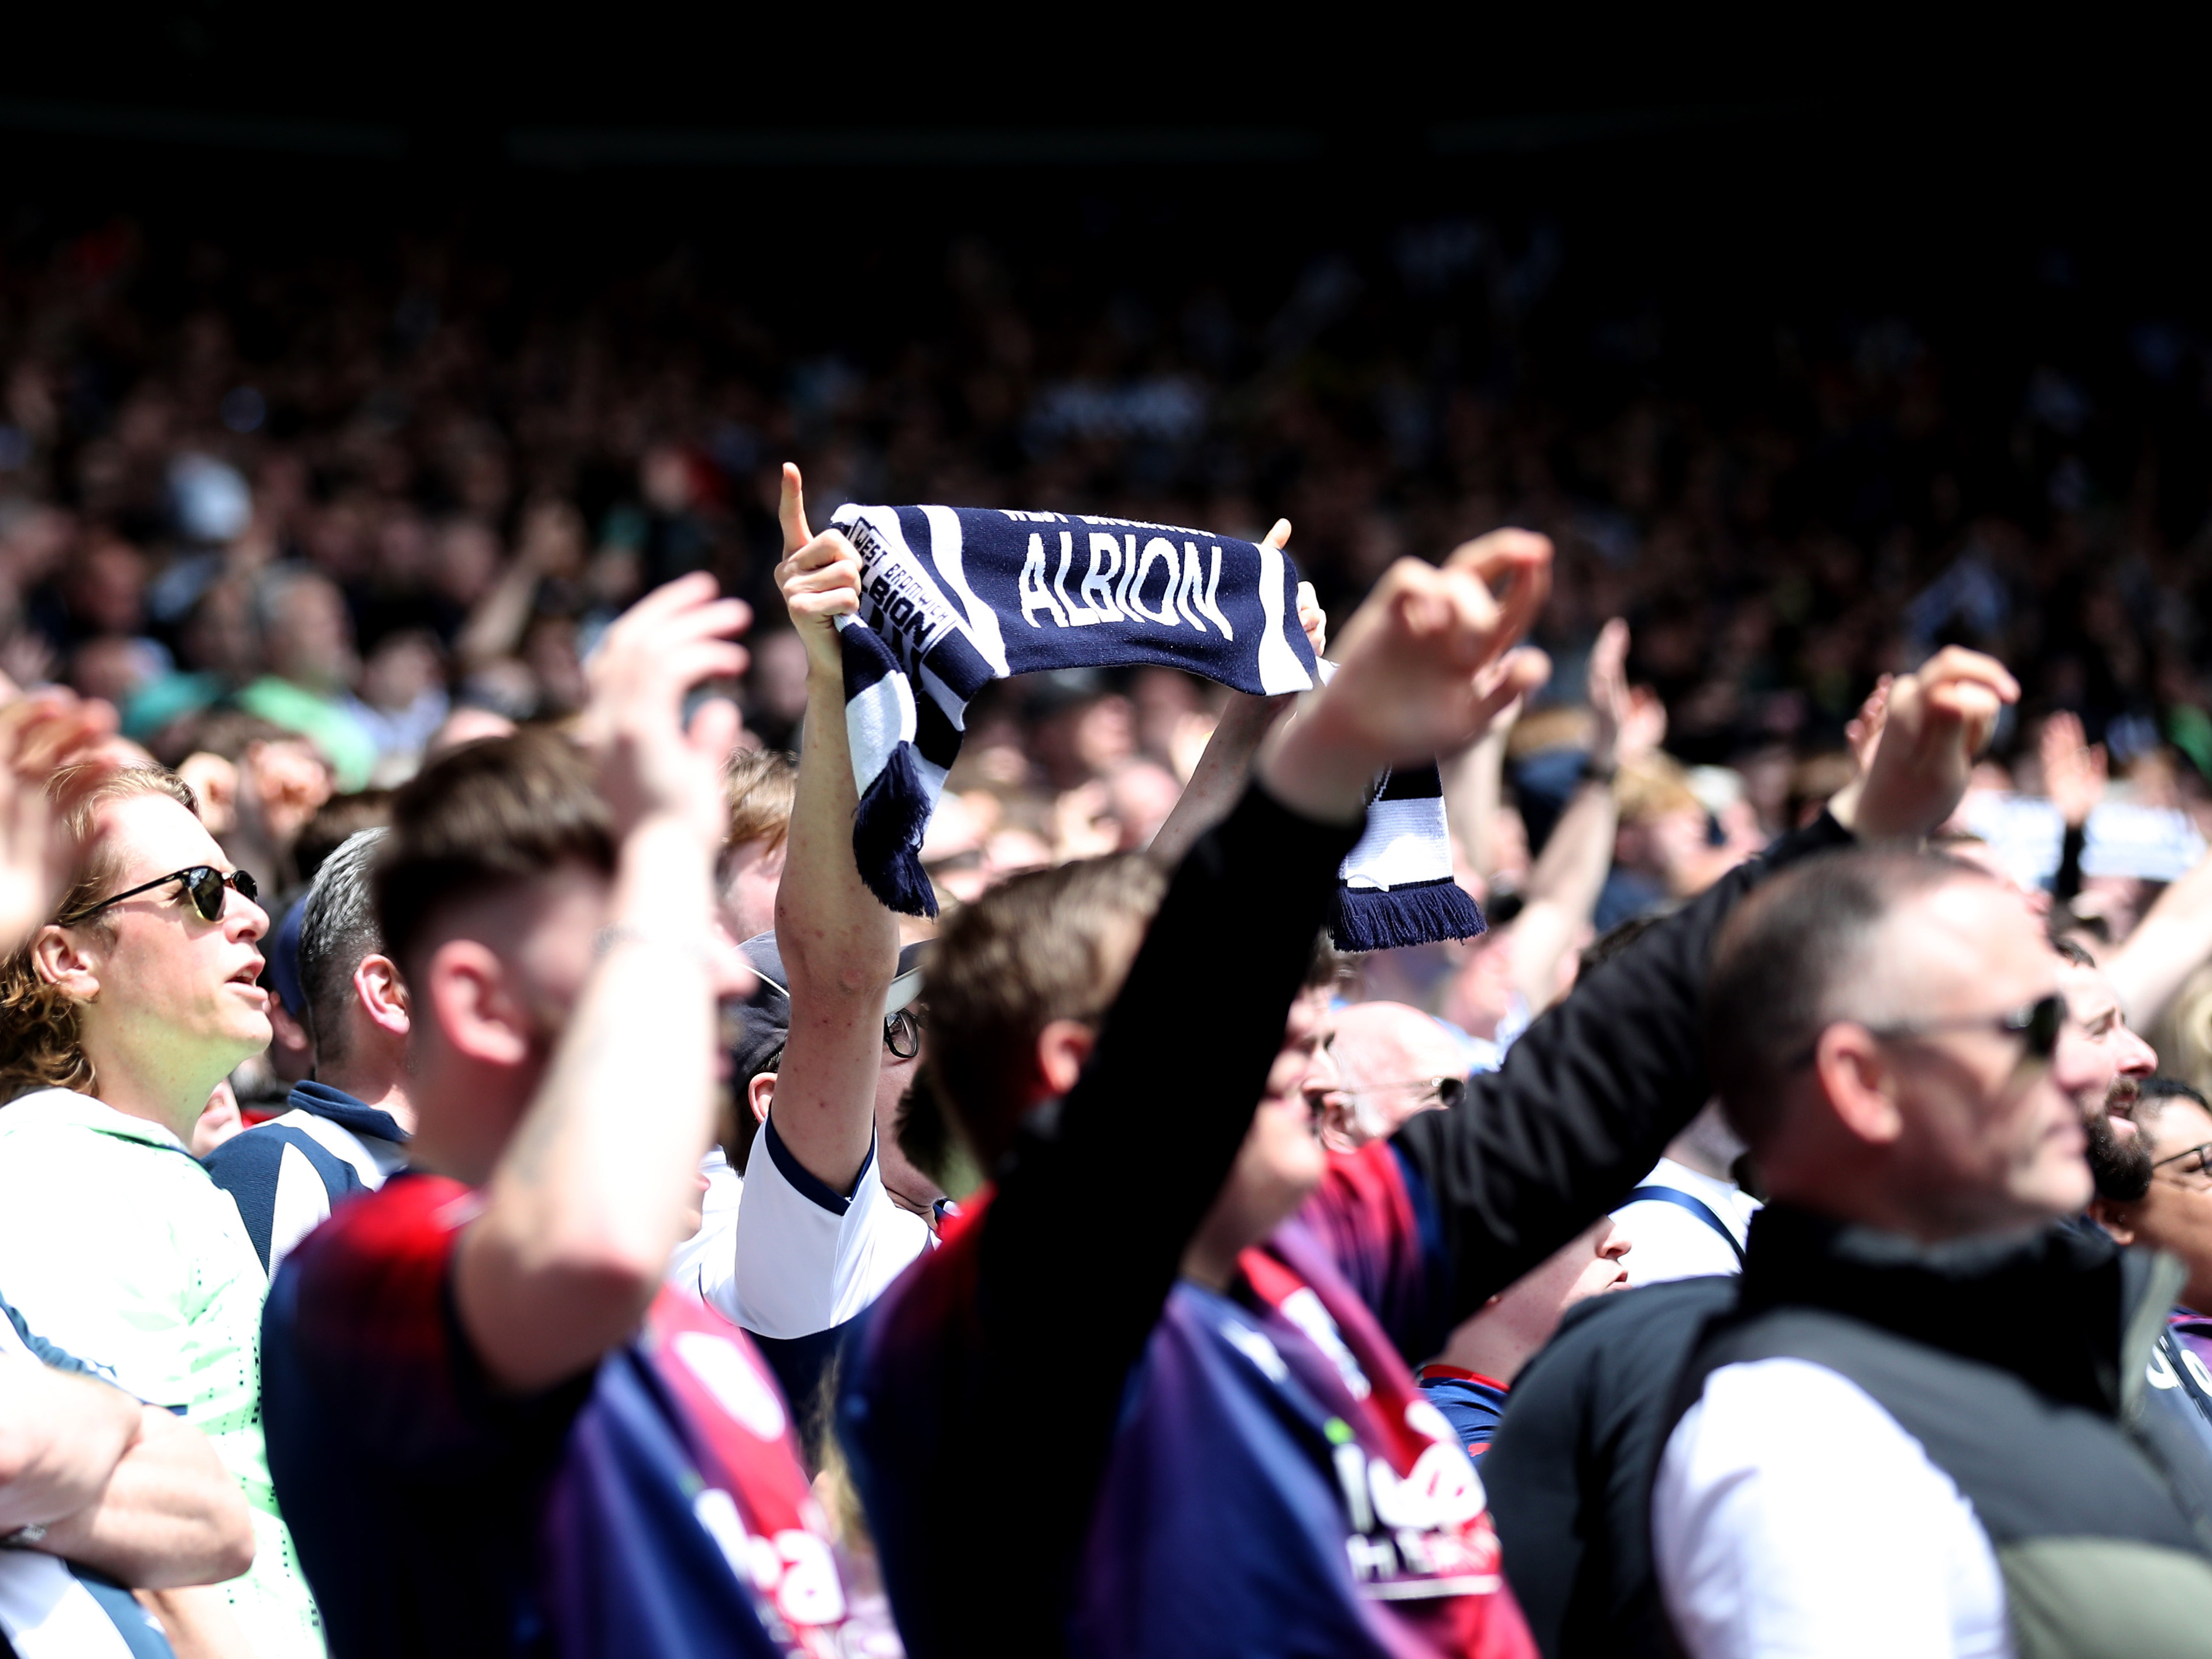 Albion fans holding up an Albion scarf at a match